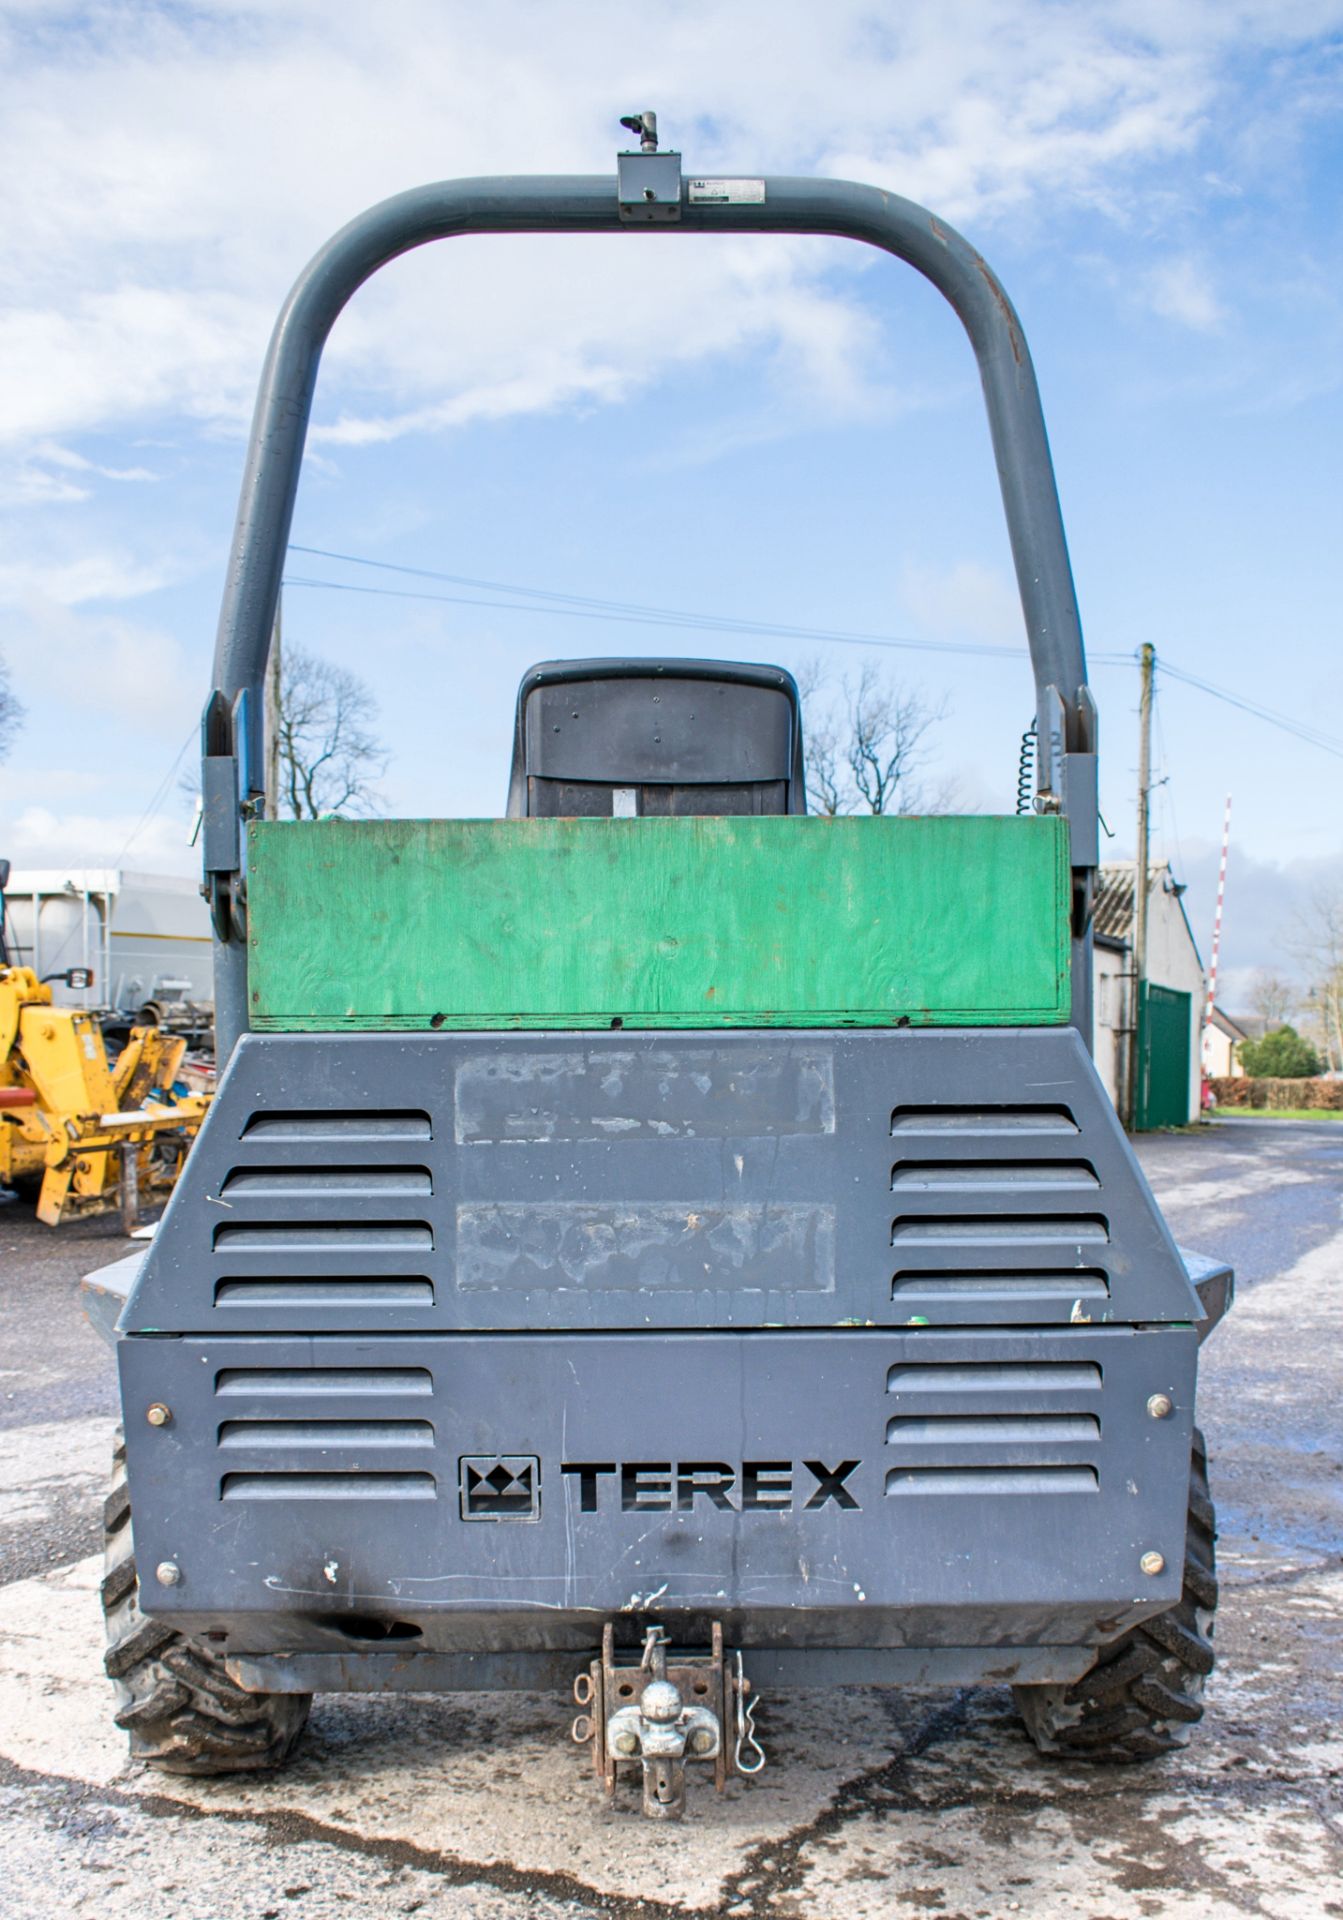 Benford Terex 2 tonne straight skip dumper Year: 2007 S/N: E703FN014 Recorded Hours: 1474 A444388 - Image 6 of 14